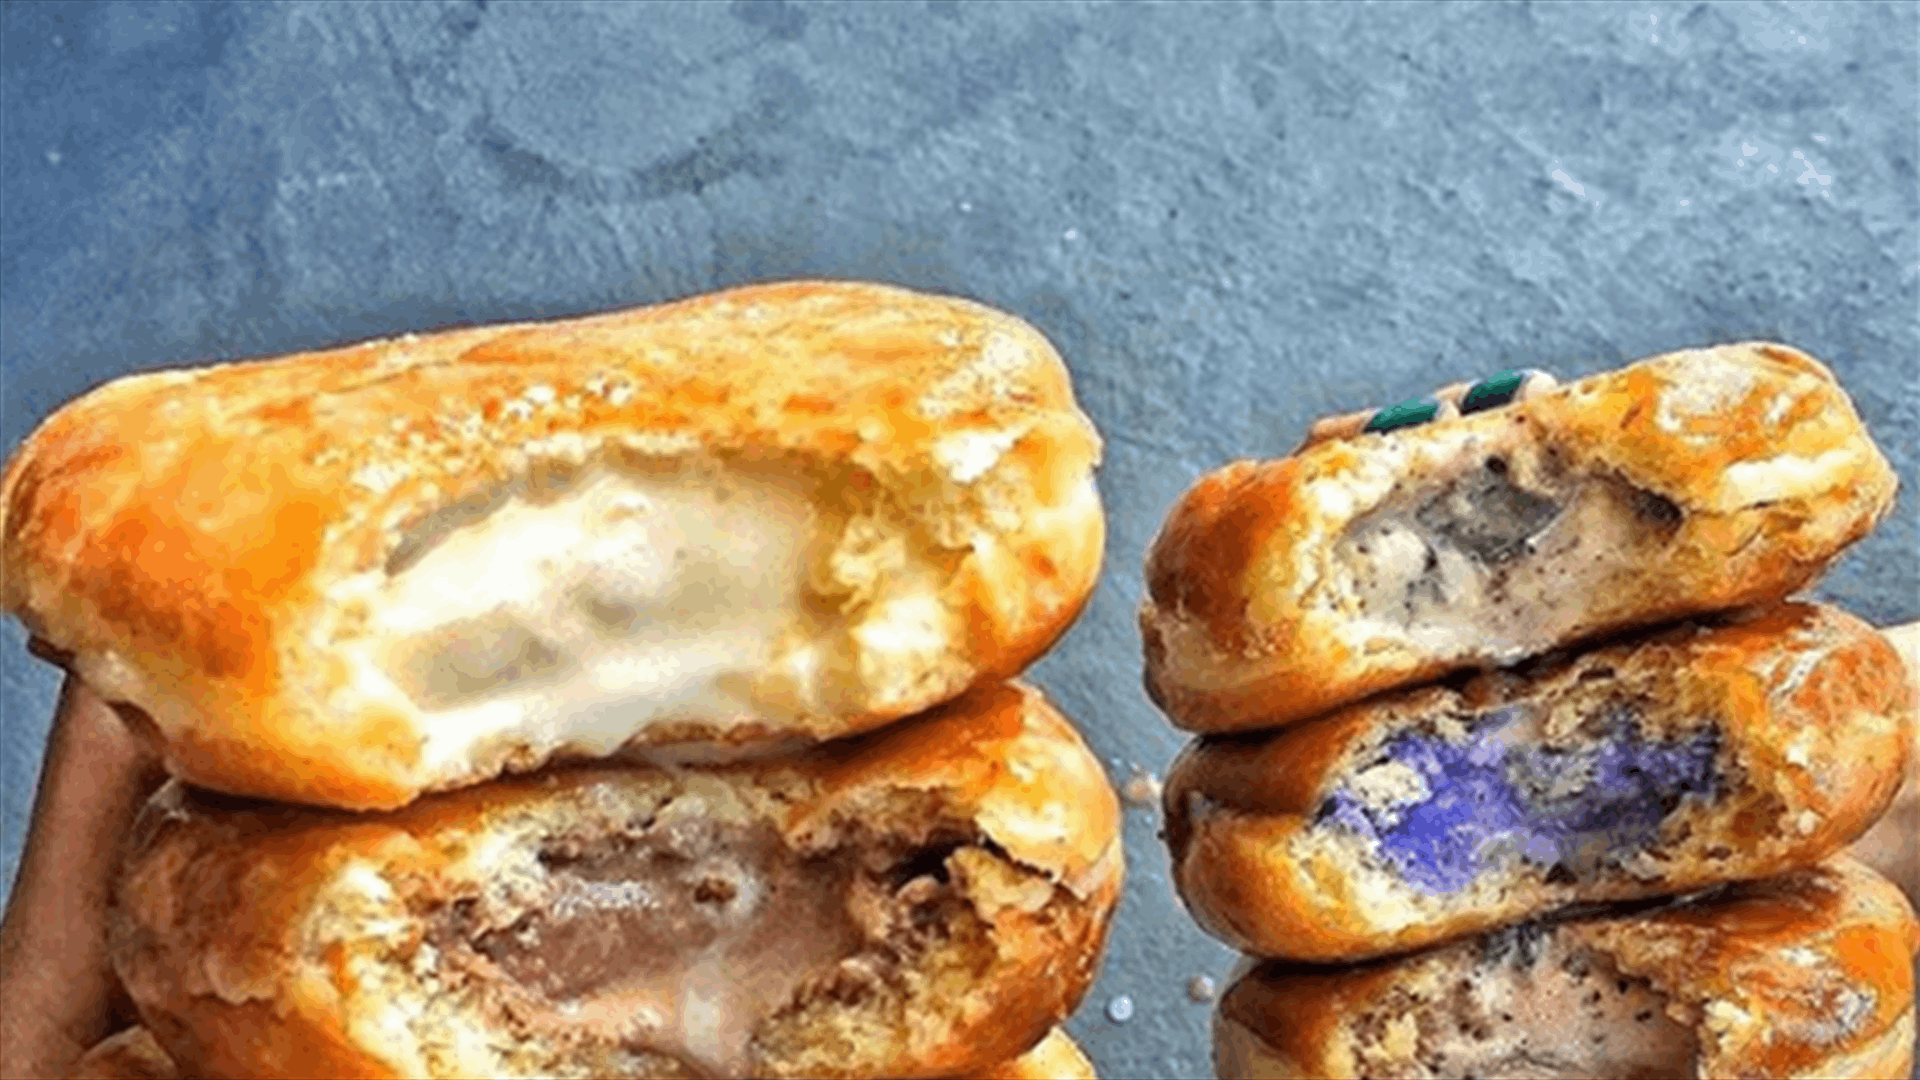 [PHOTO] Donuts Filled With Ice-Cream Are Now A Thing